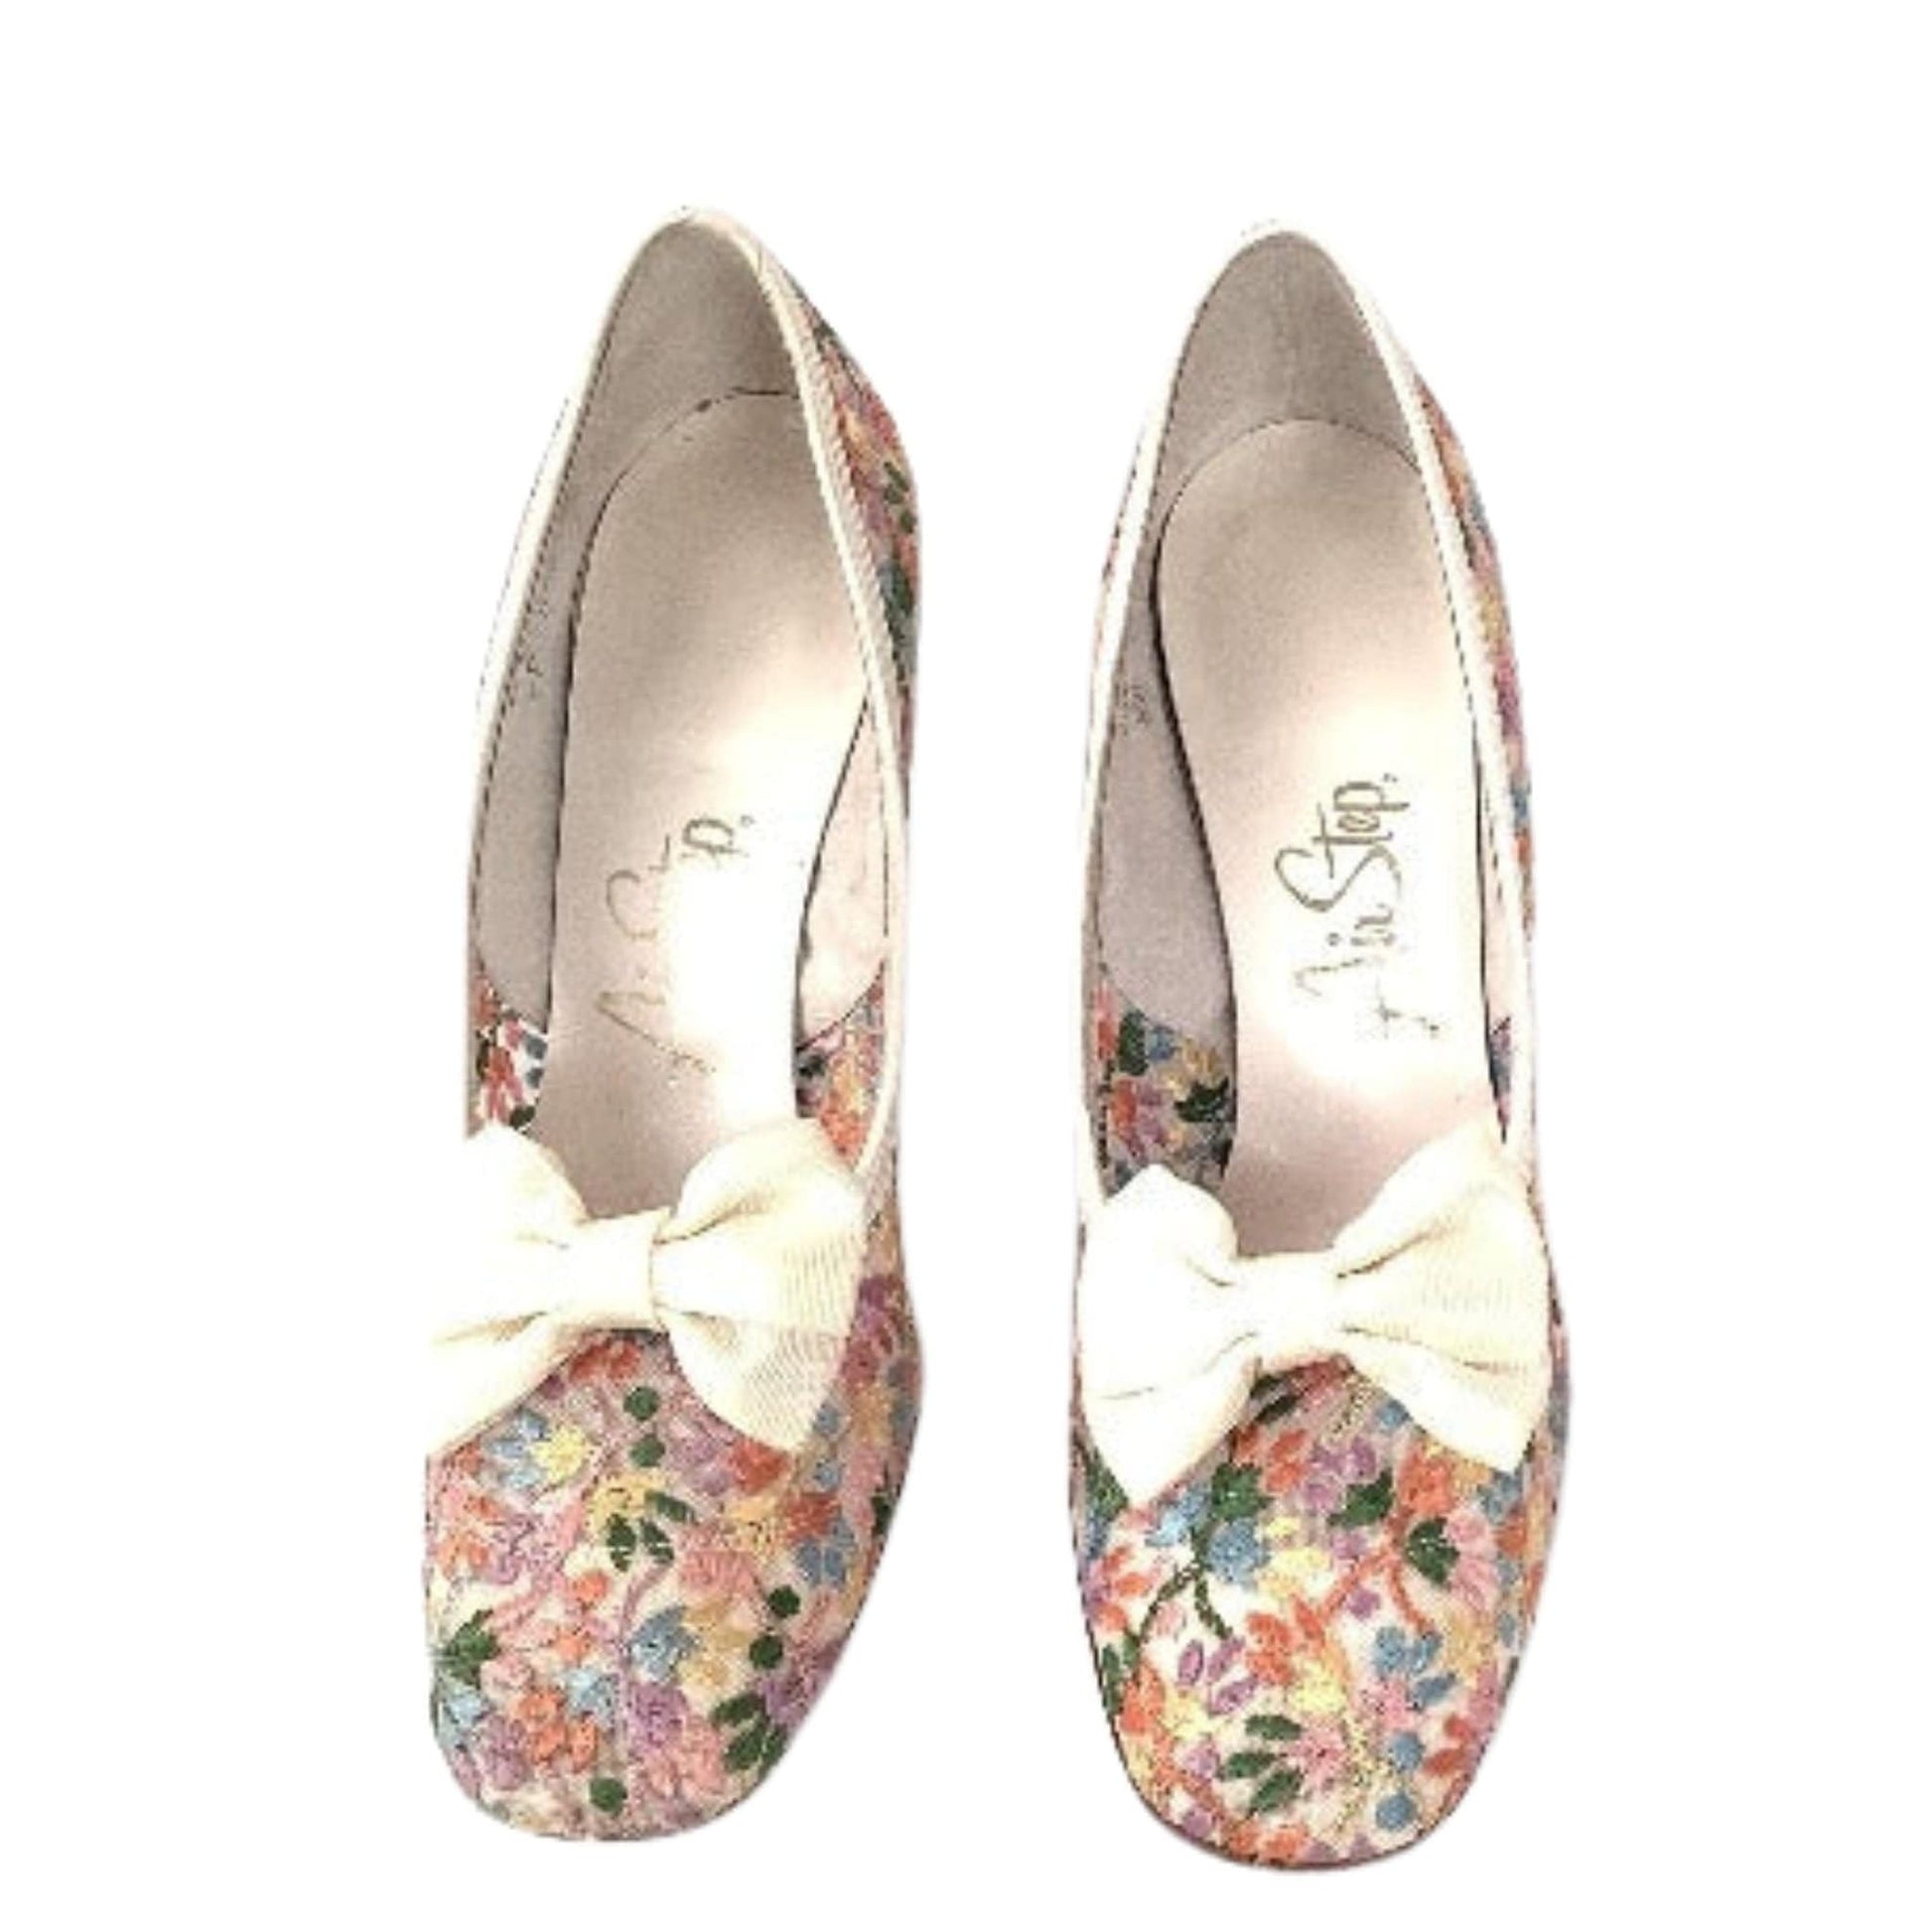 Embroidered Pump Shoes 7 / Multi / Vintage 1960s